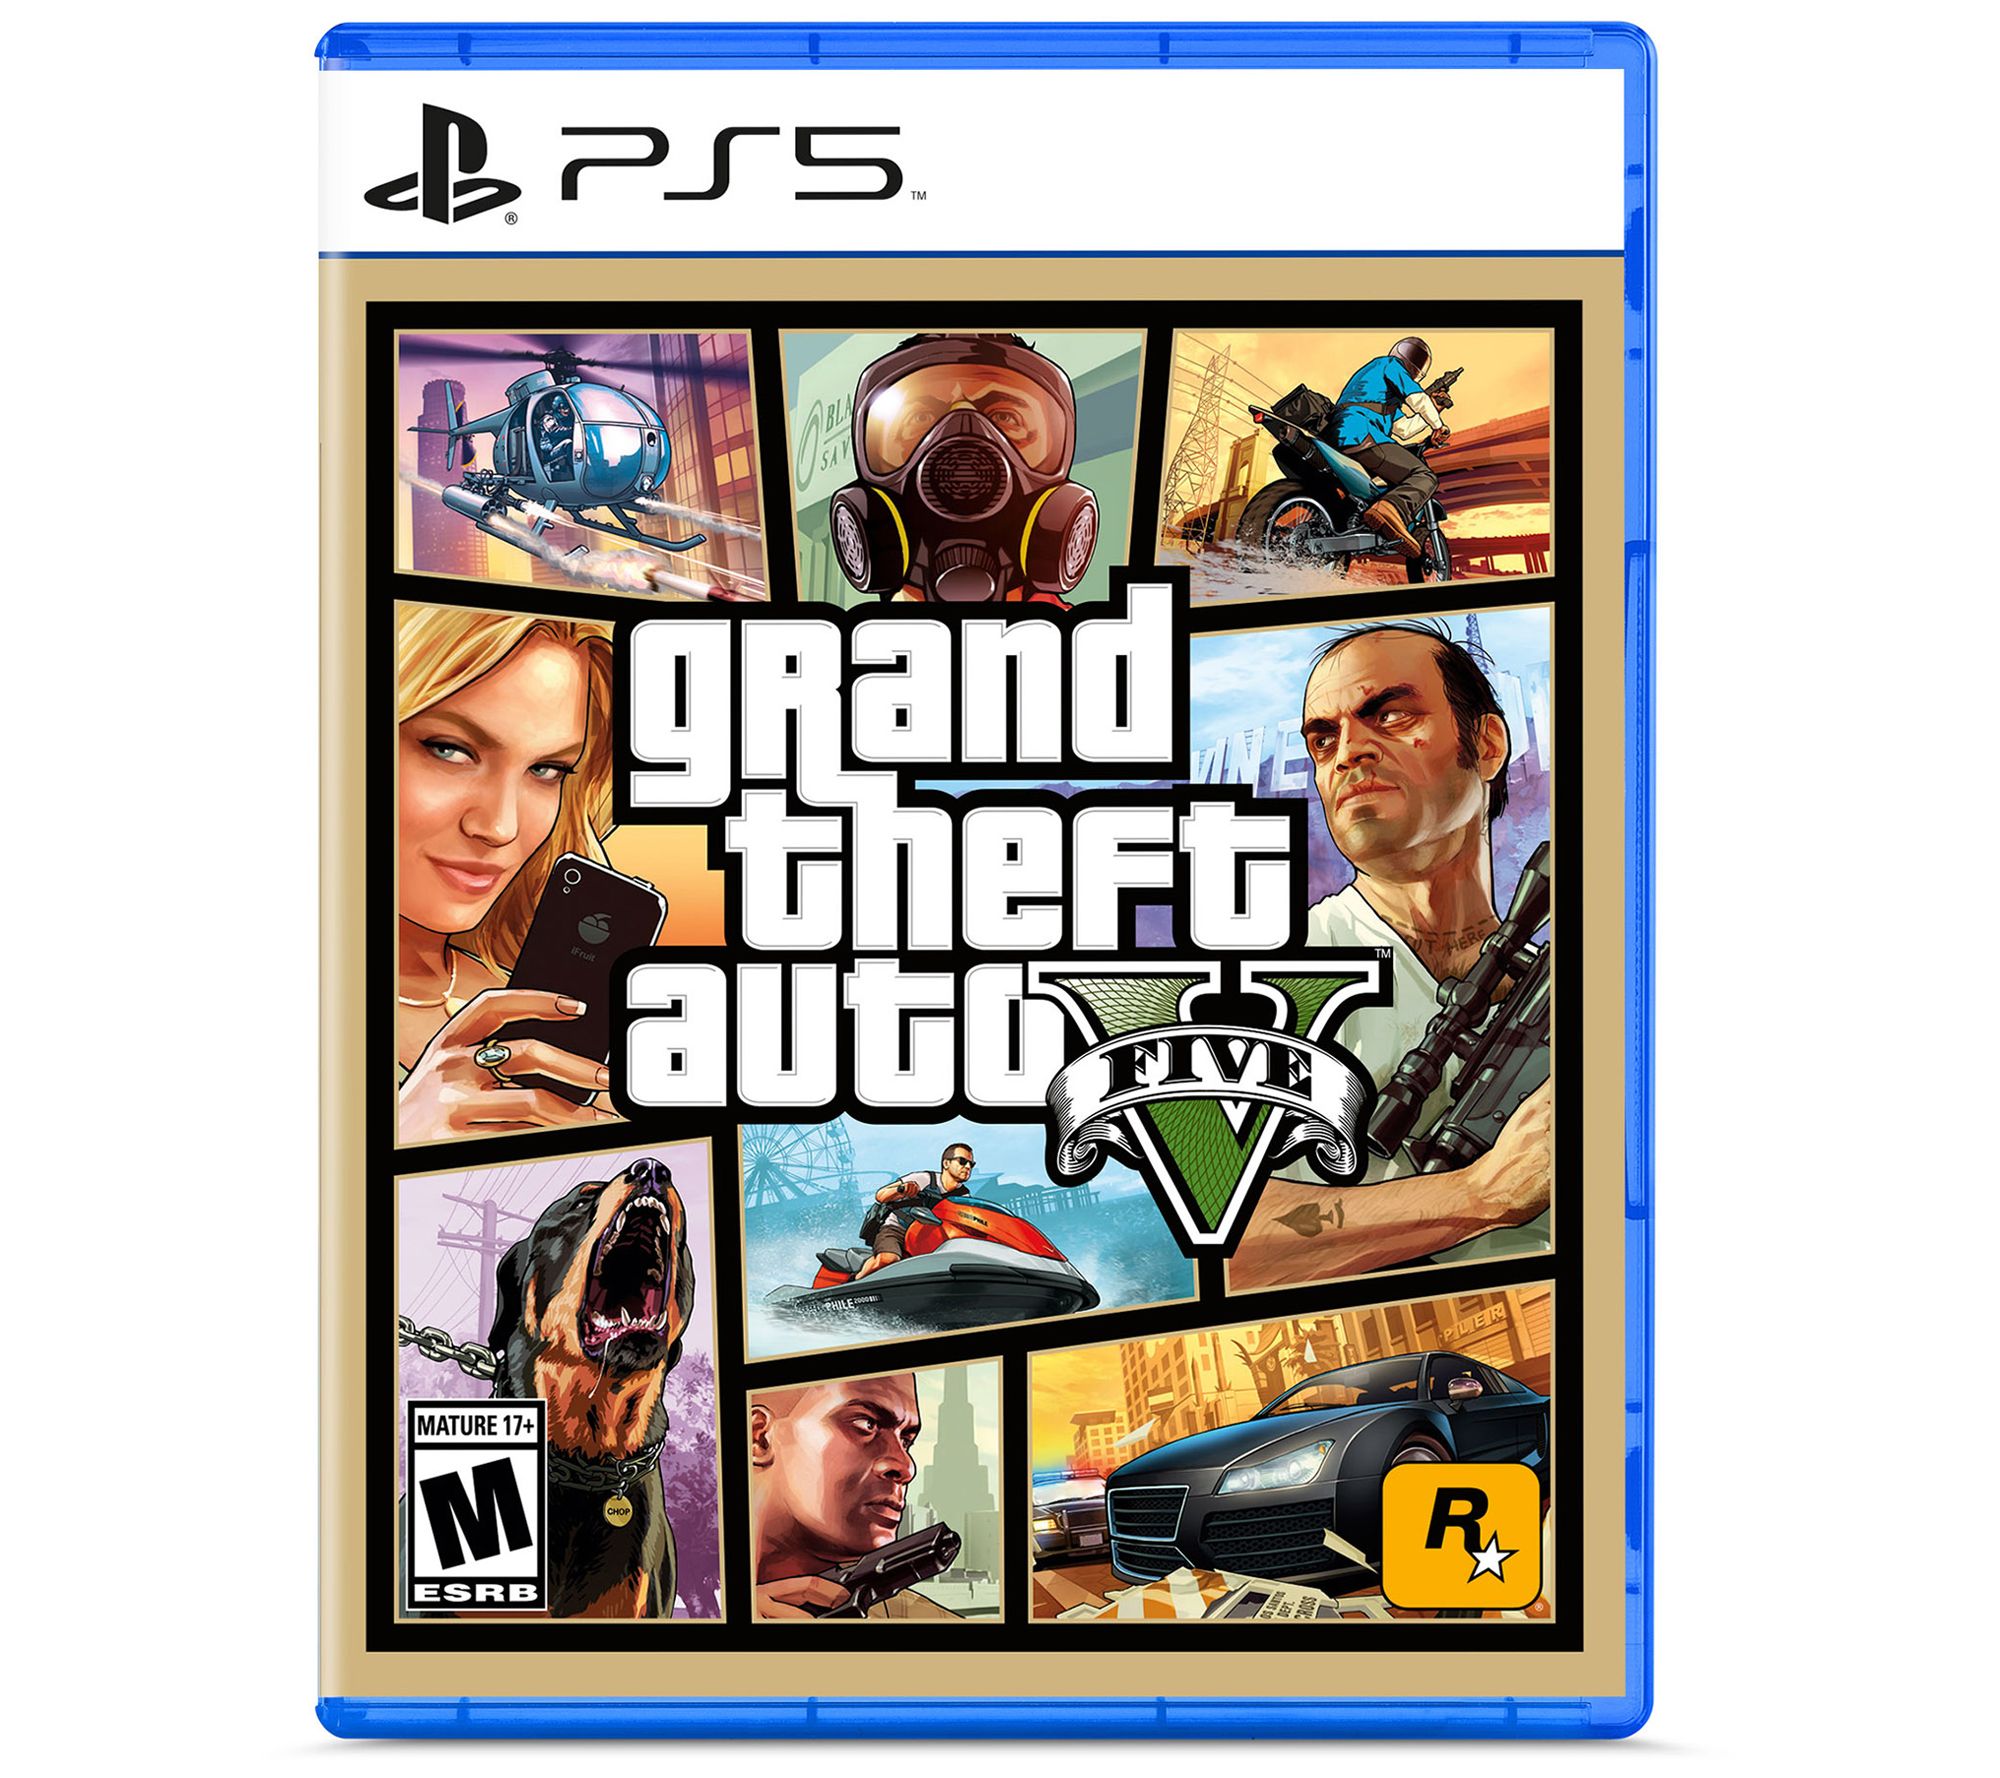 Grand Theft Auto III - The Definitive Edition - PS5 Platinum Review